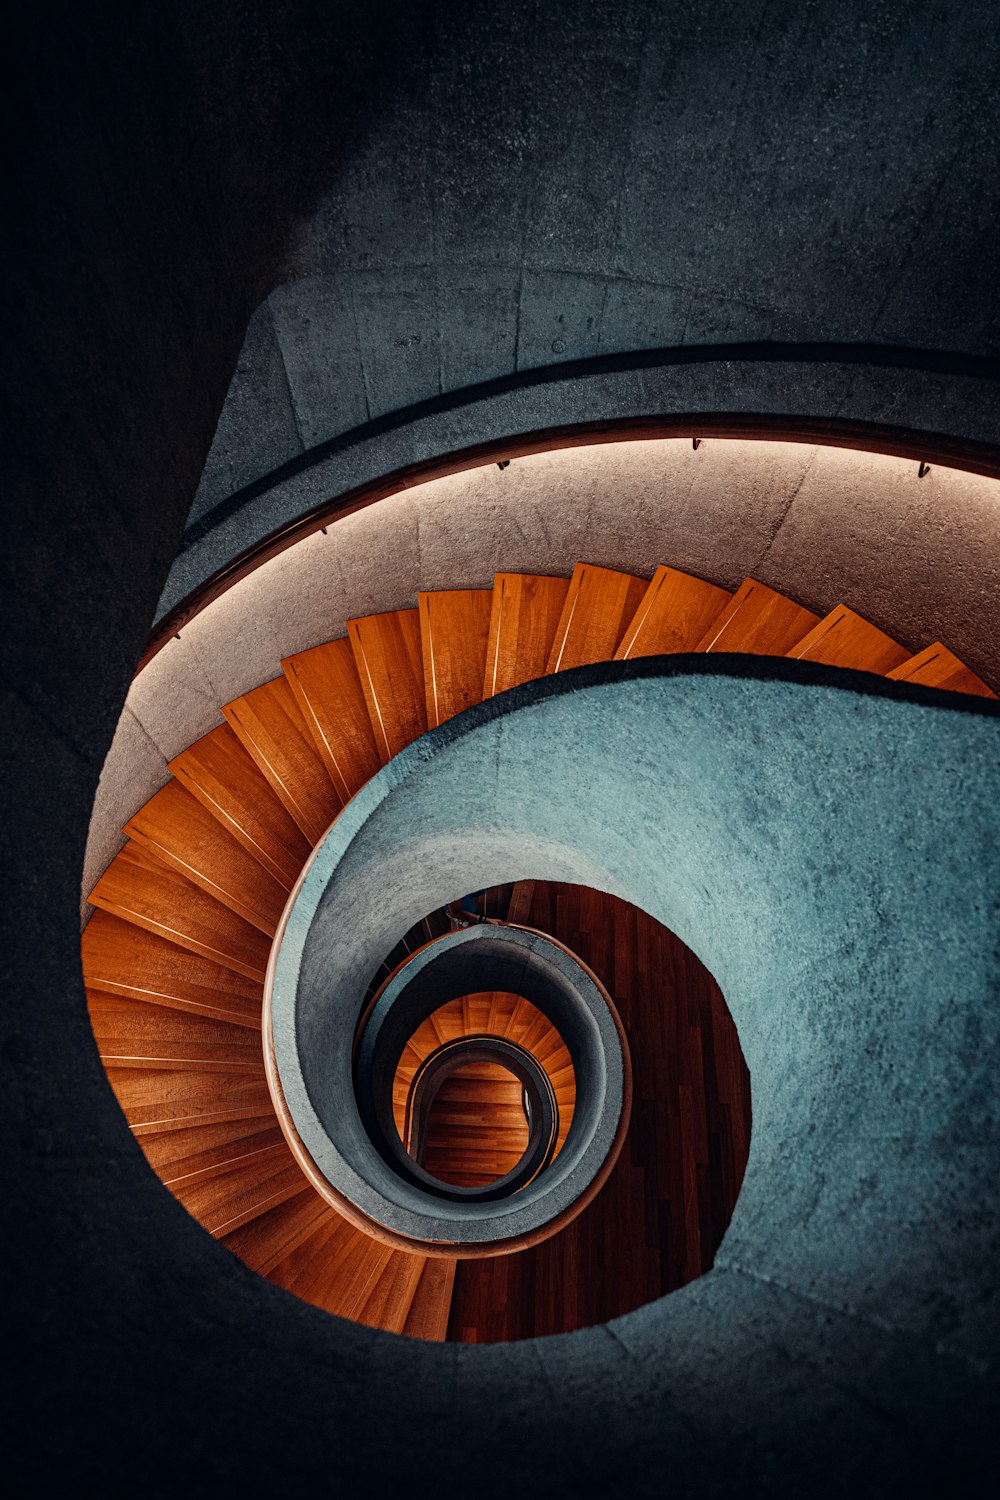 a spiral staircase in a building with a wooden floor